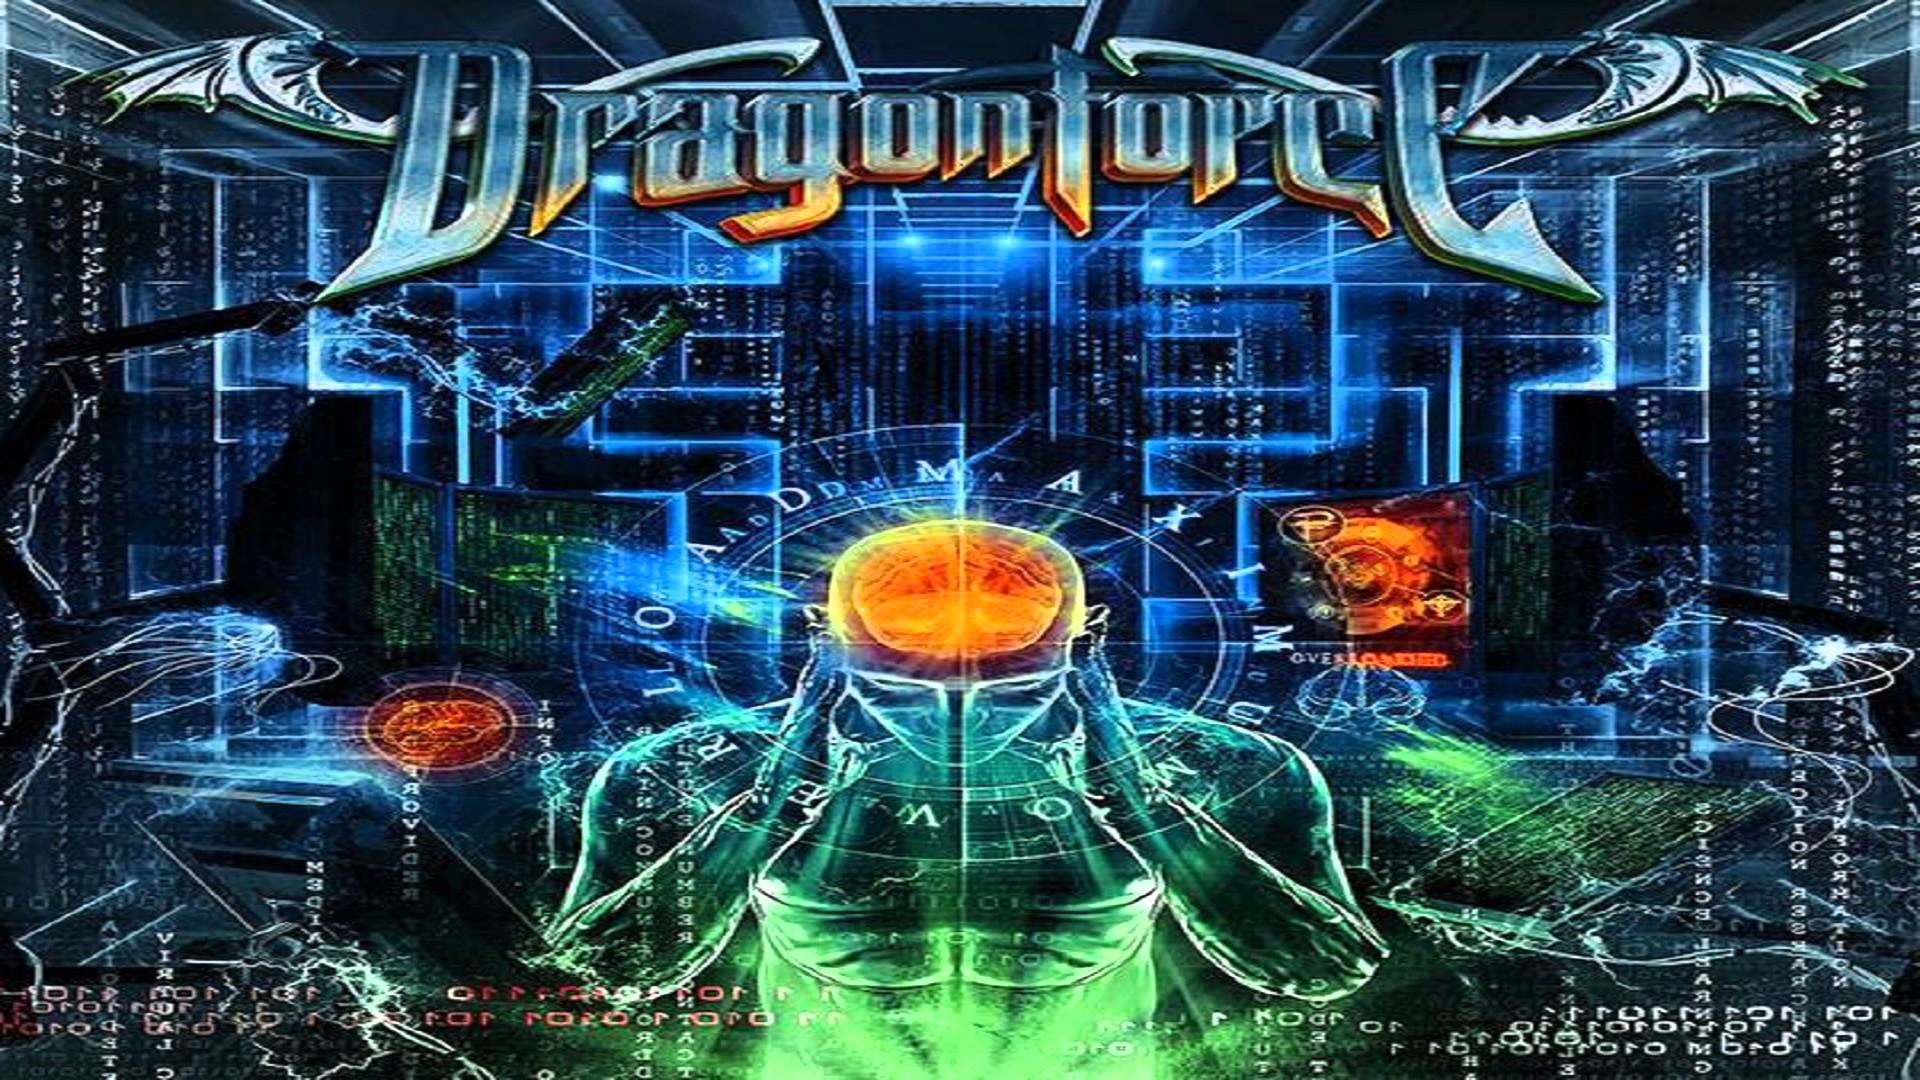 Dragonforce Wallpapers